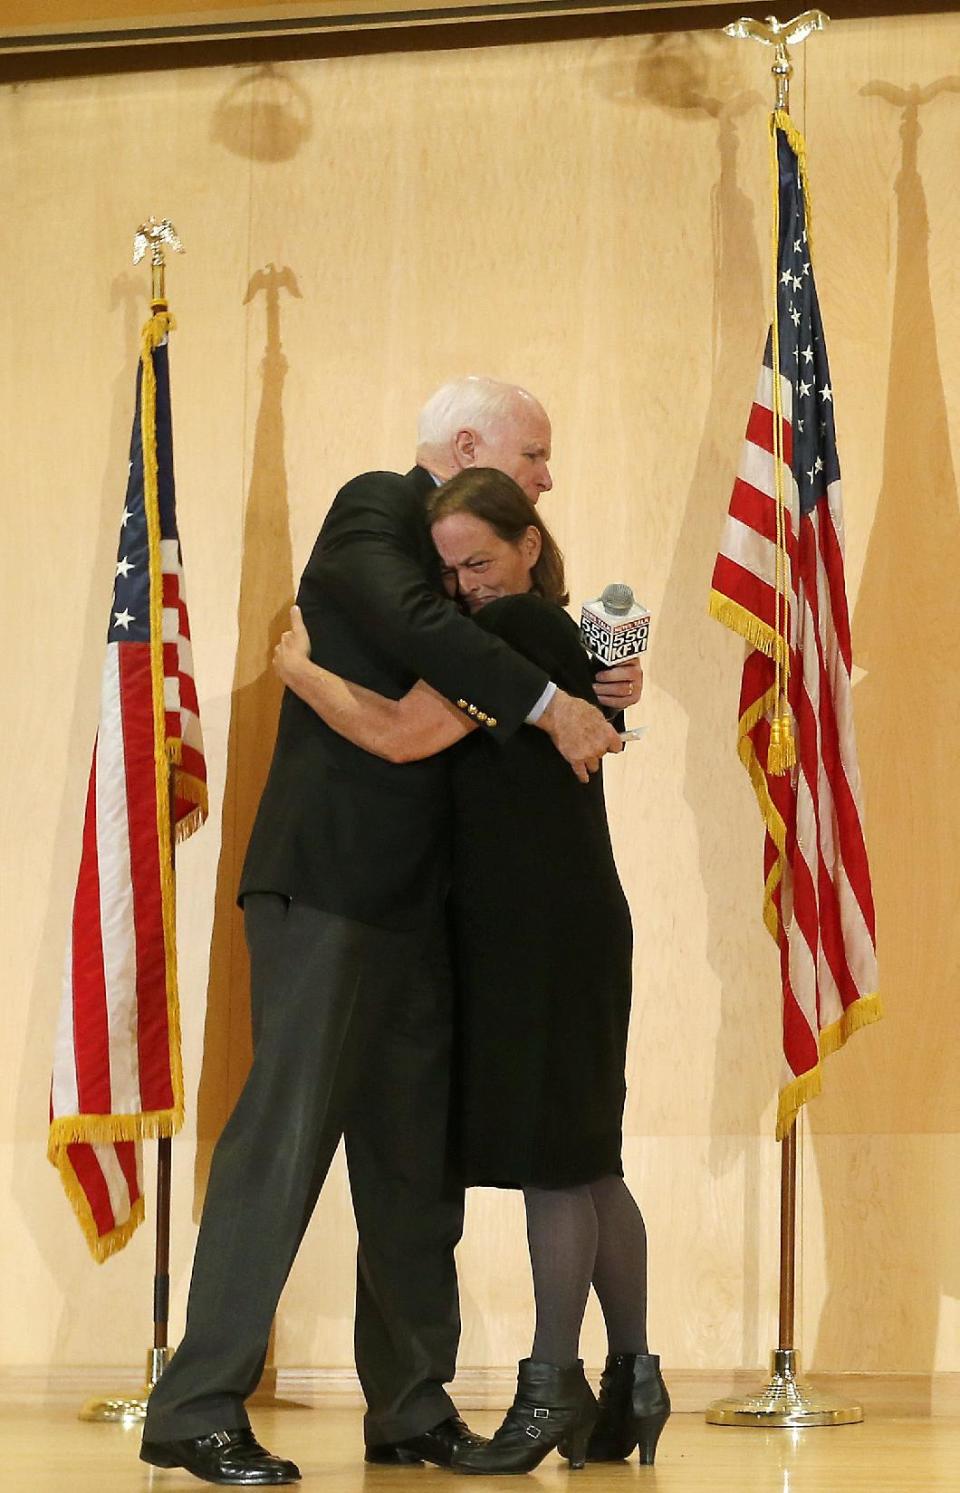 Sen. John McCain embraces Gabriel Basso after she shared how her veteran husband died during a forum with veterans on Friday, May 9, 2014, in Phoenix. McCain was discussing lapses in care at the Phoenix Veterans Affairs hospital that prompted a national review of operations around the country. (AP Photo/Matt York)